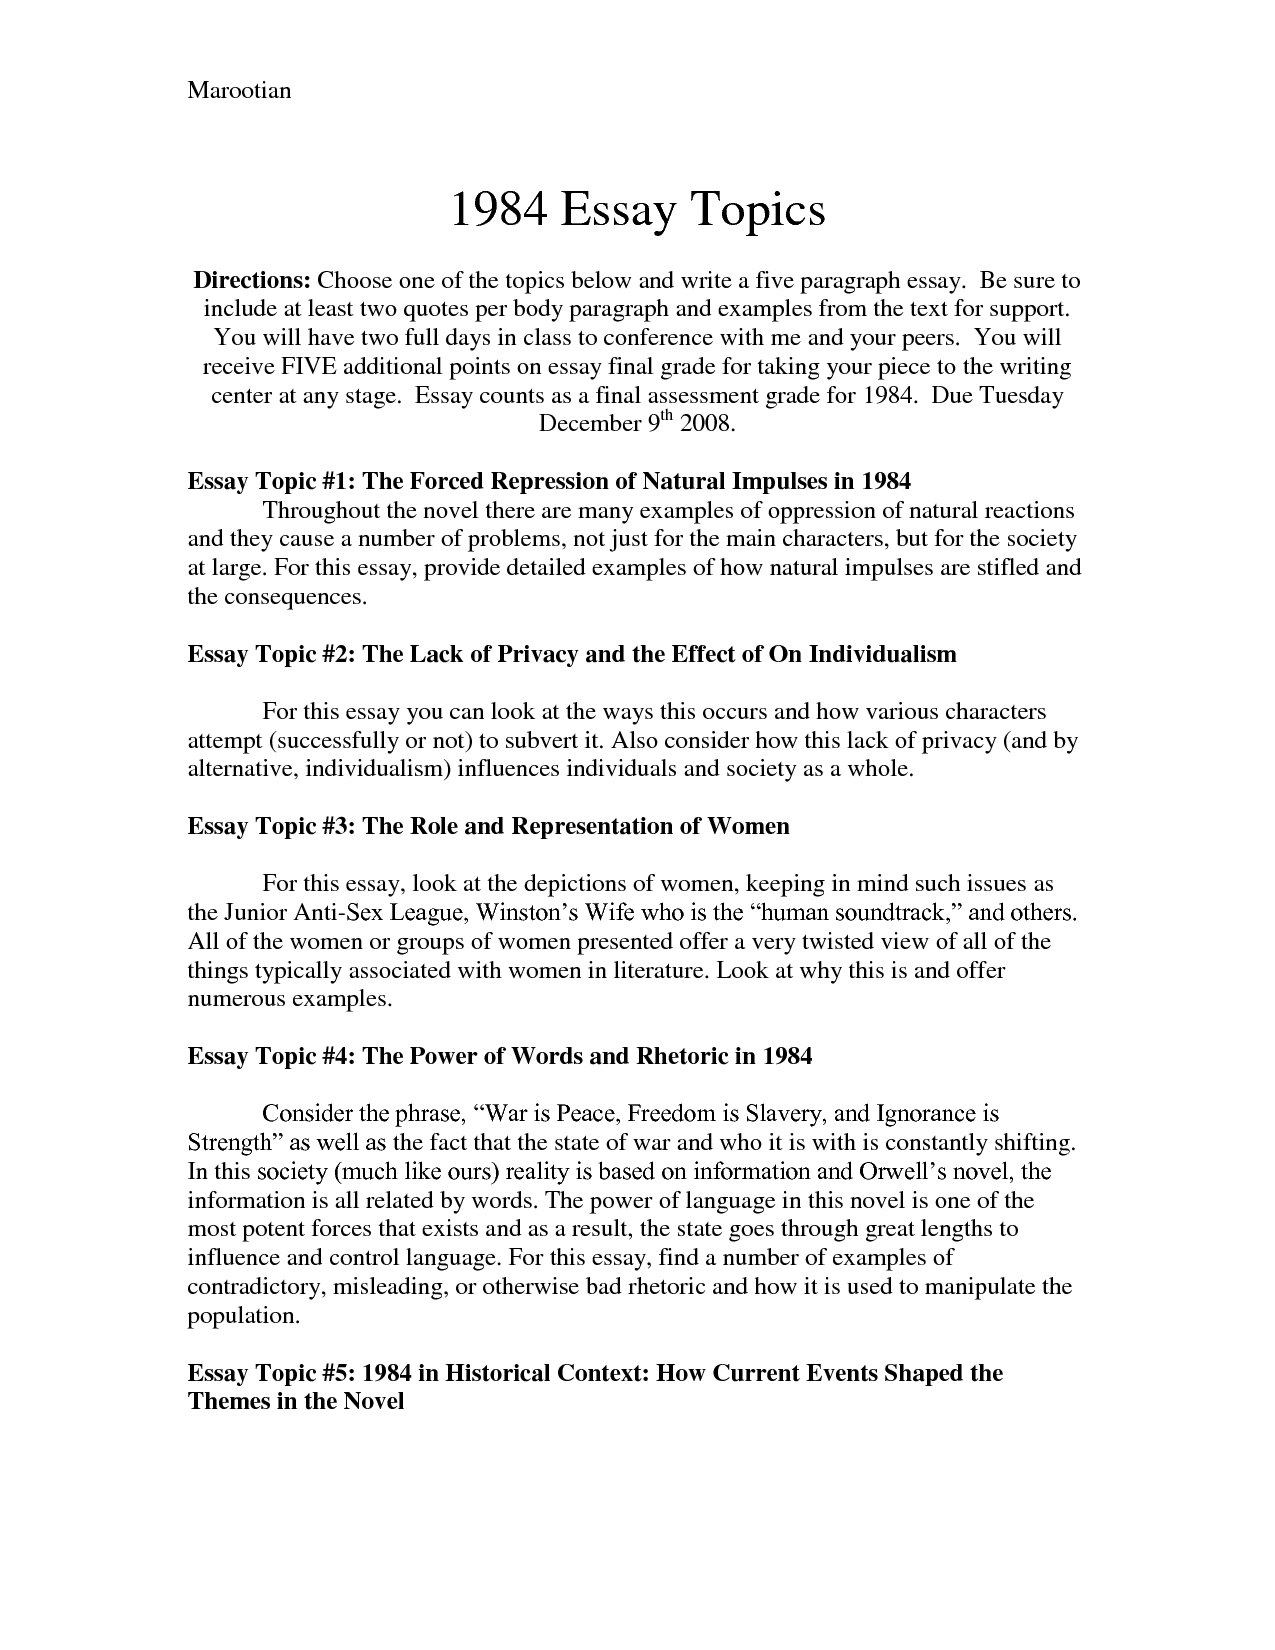 Examples of a thesis statement for an essay